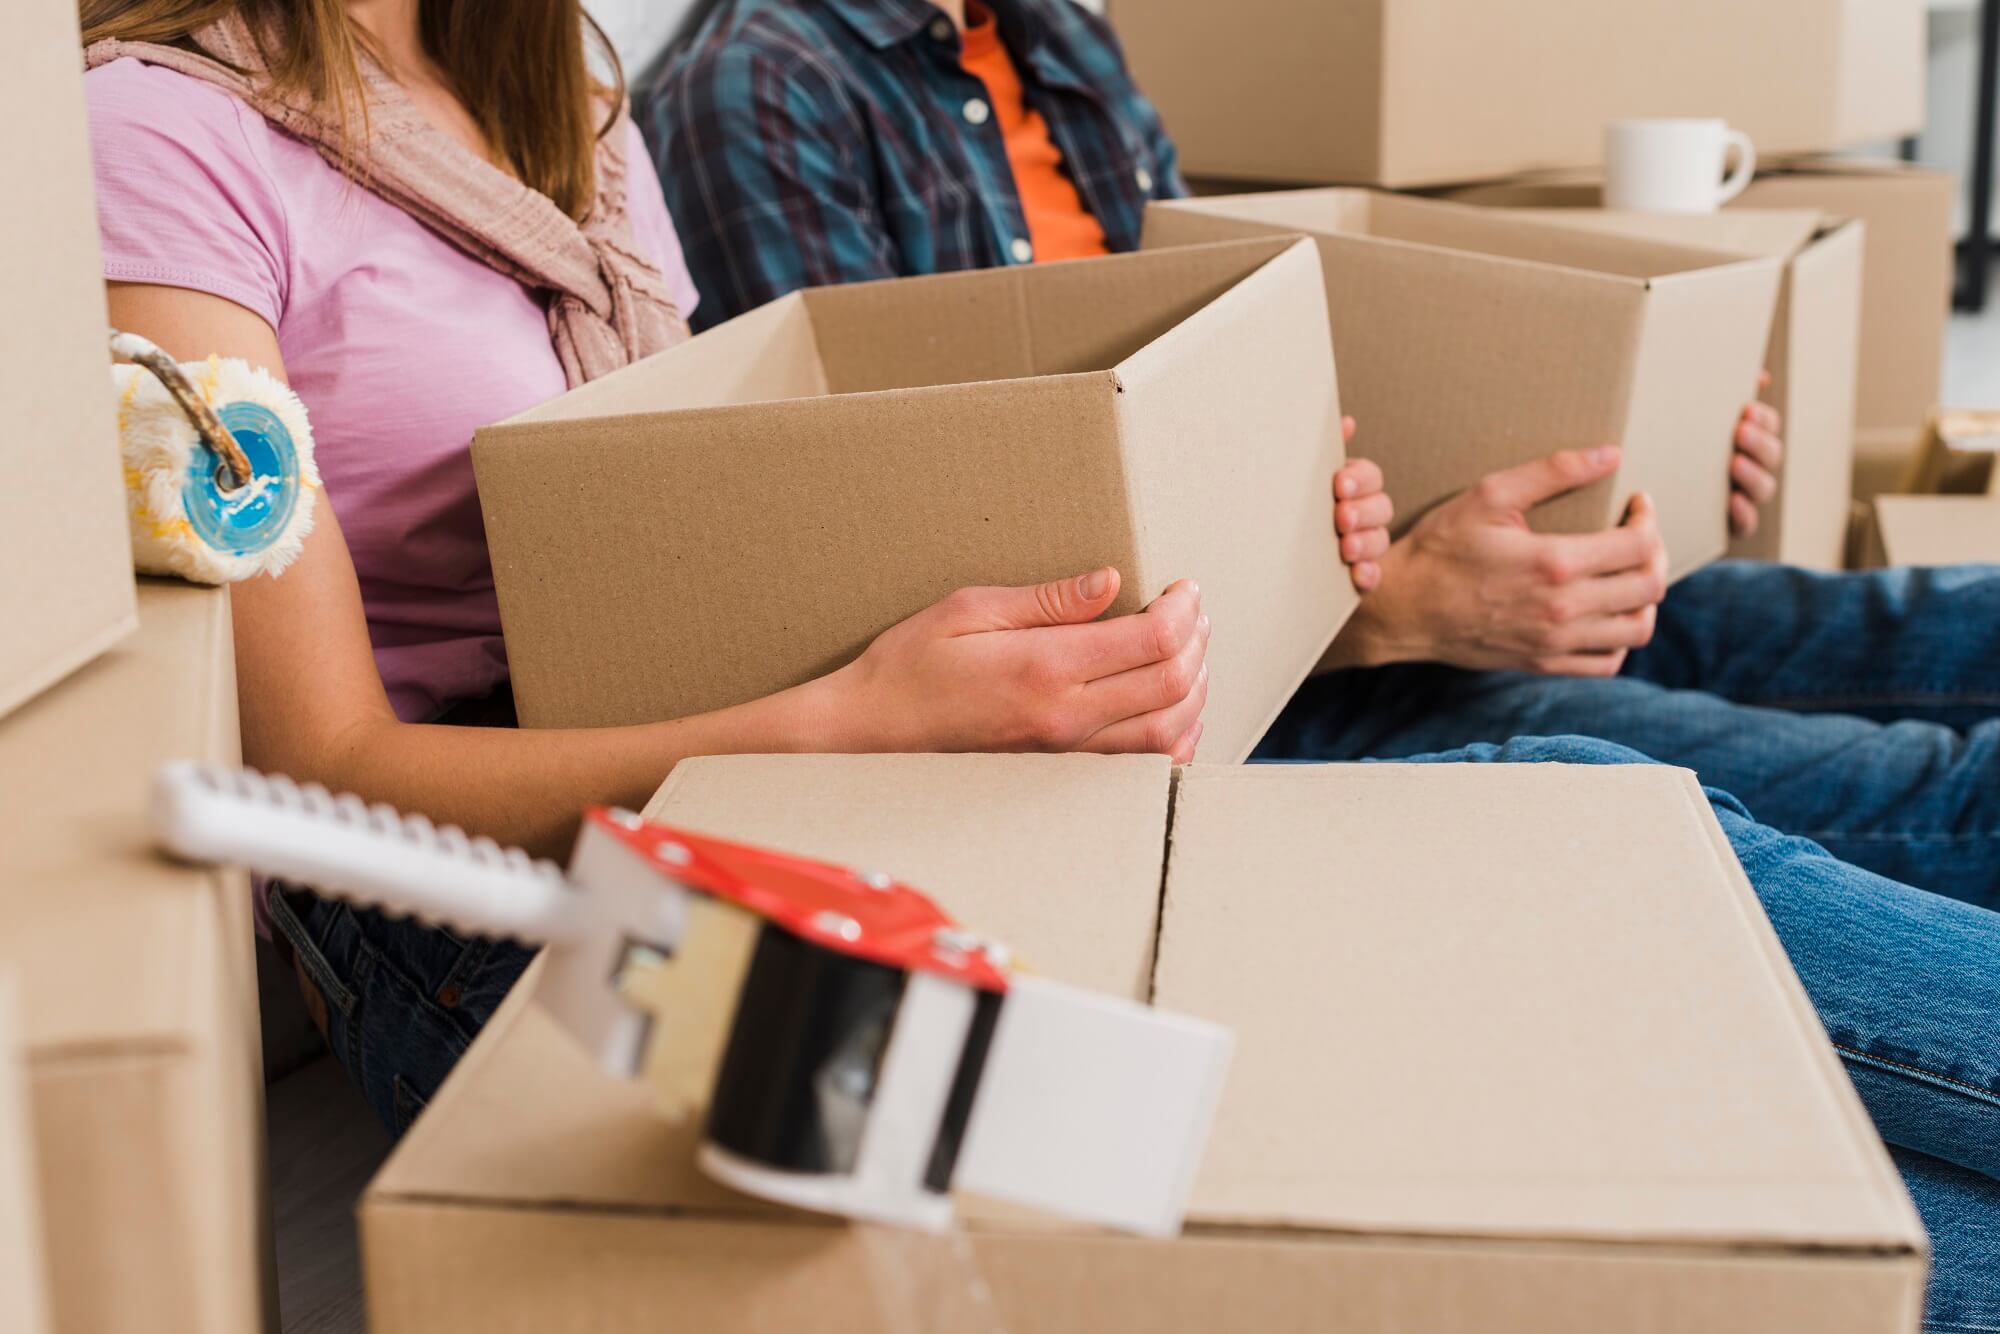 4 Common Things That Are Forgotten About When Moving House